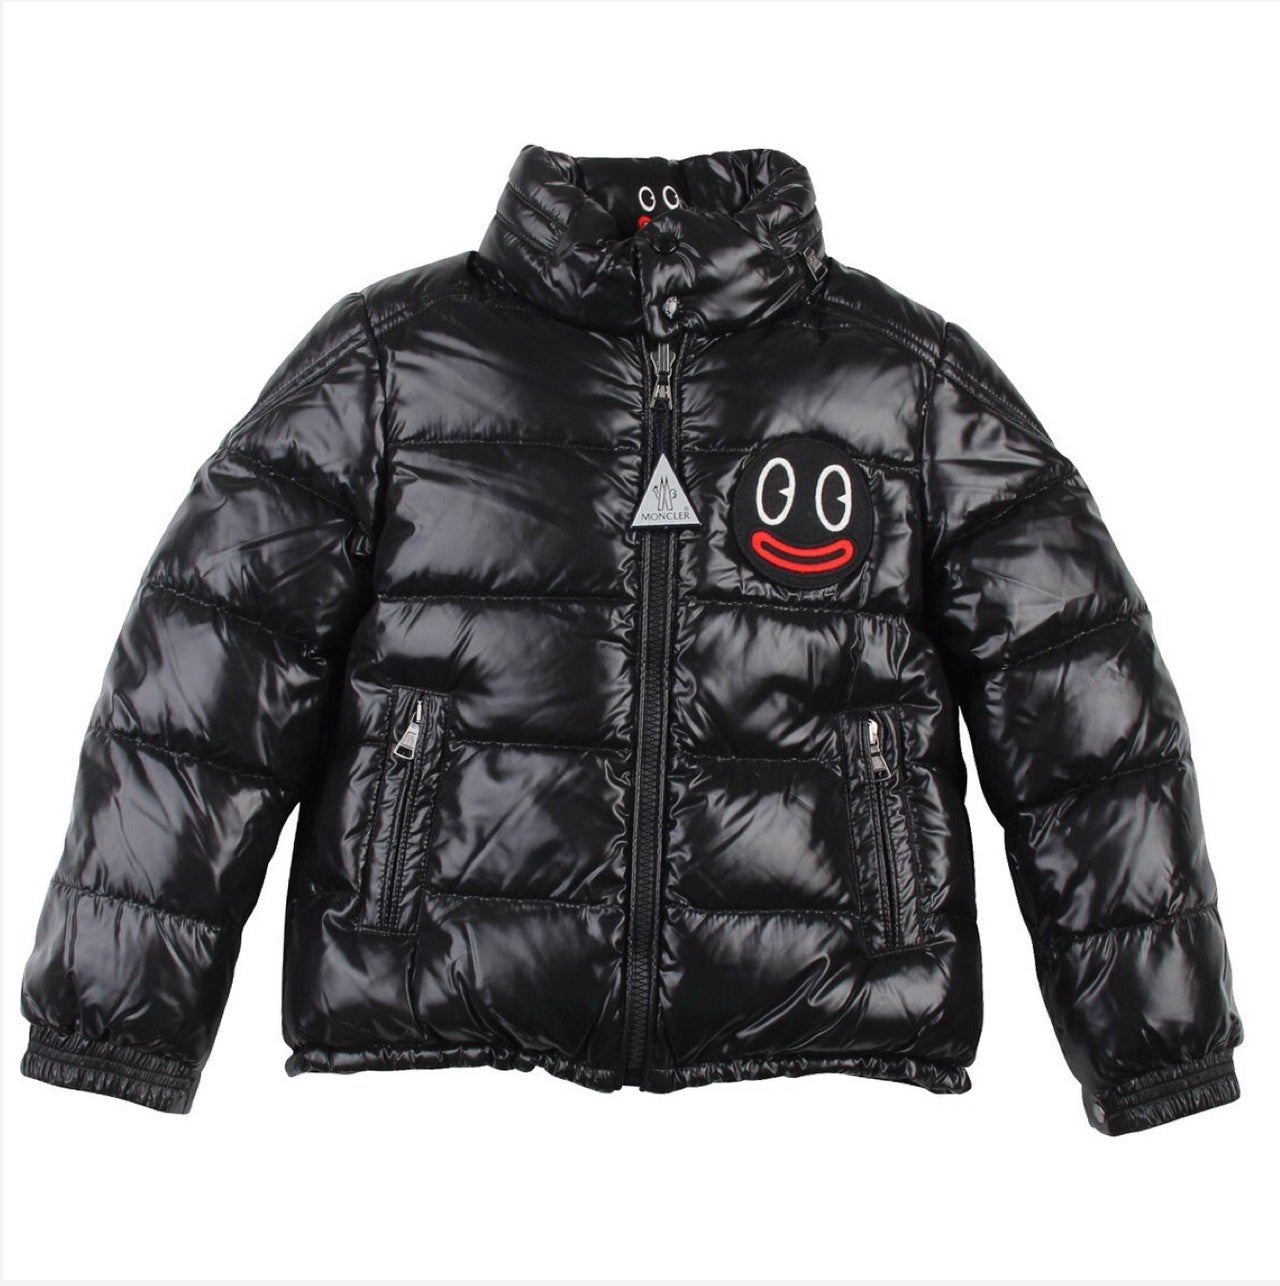 wimper Karu marathon Moncler is Selling a Jacket With Blackface on it, Racist or Nah? (UPDATE) |  Essence